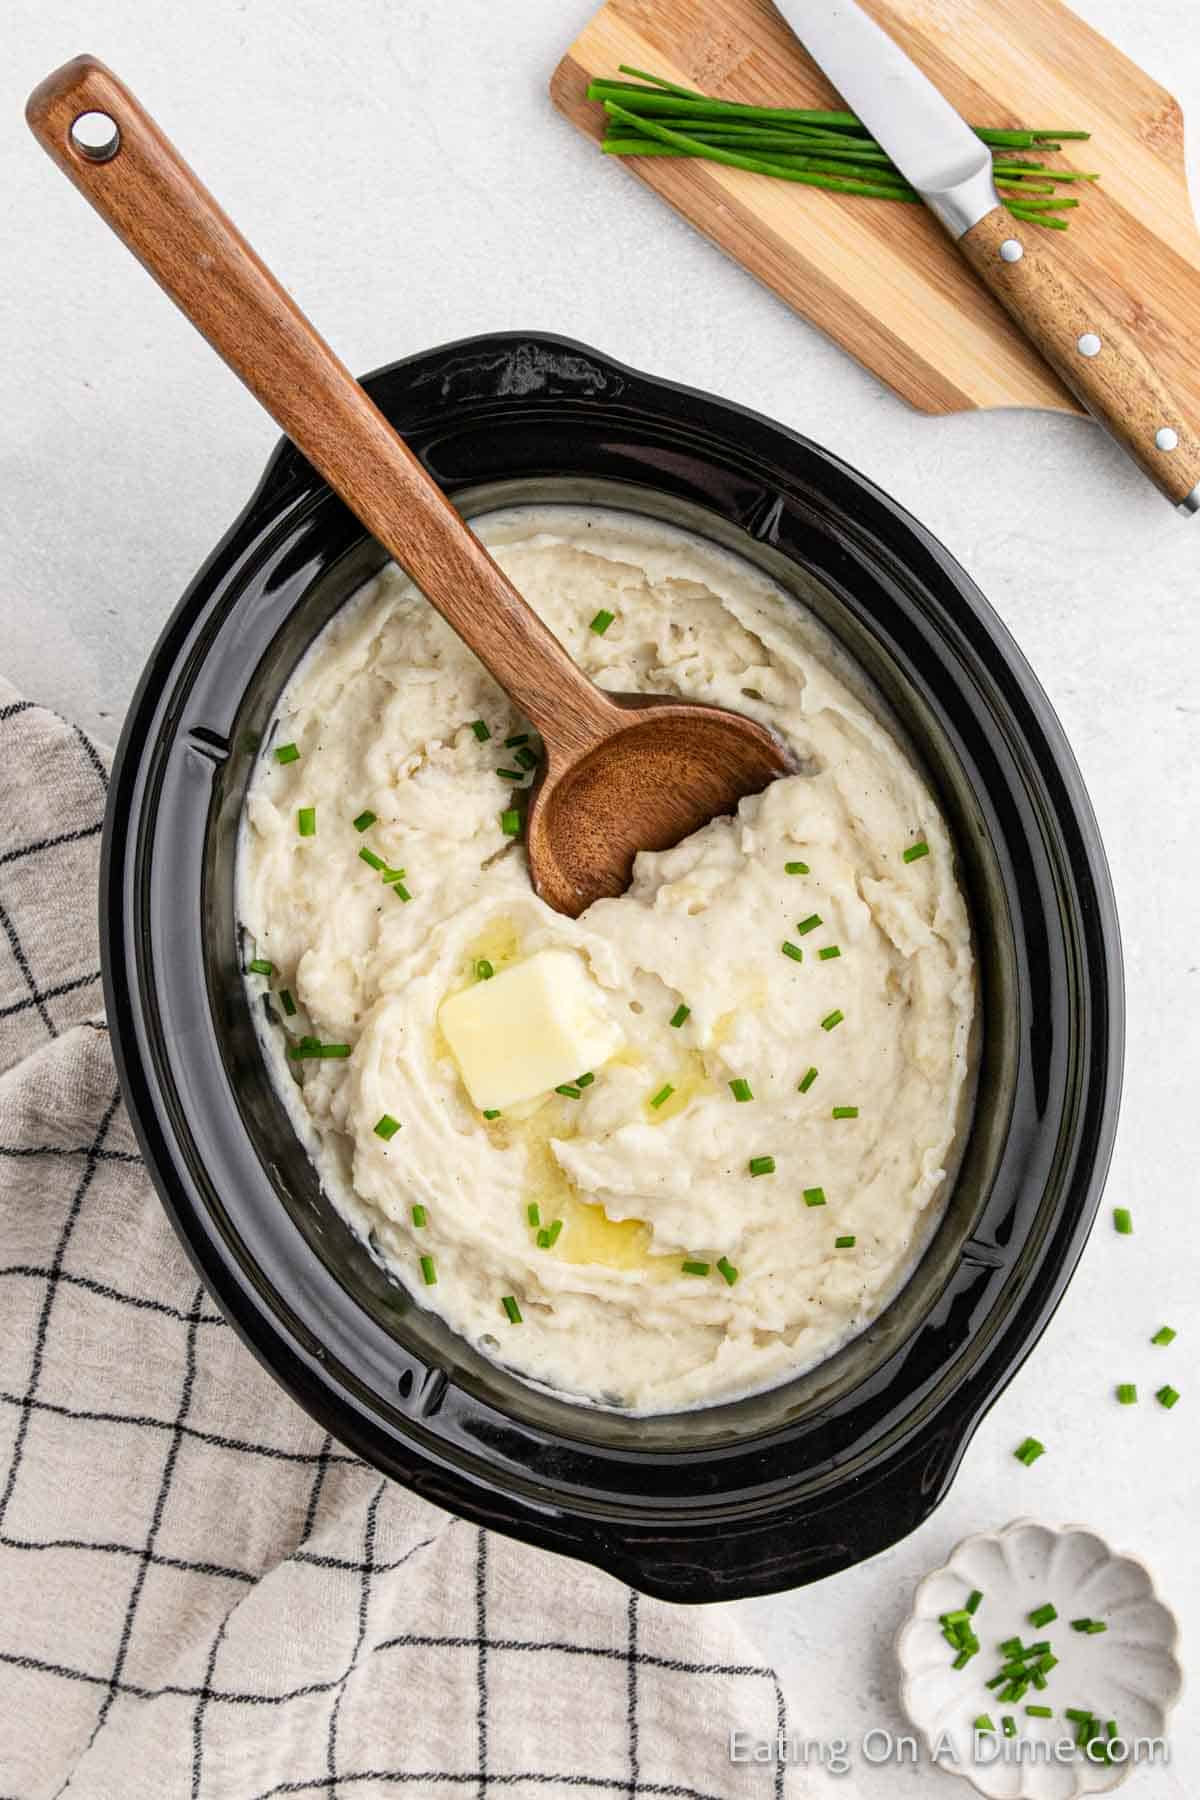 Mashed Potatoes in the crock pot with a wooden spoon and topped with melted butter and chives